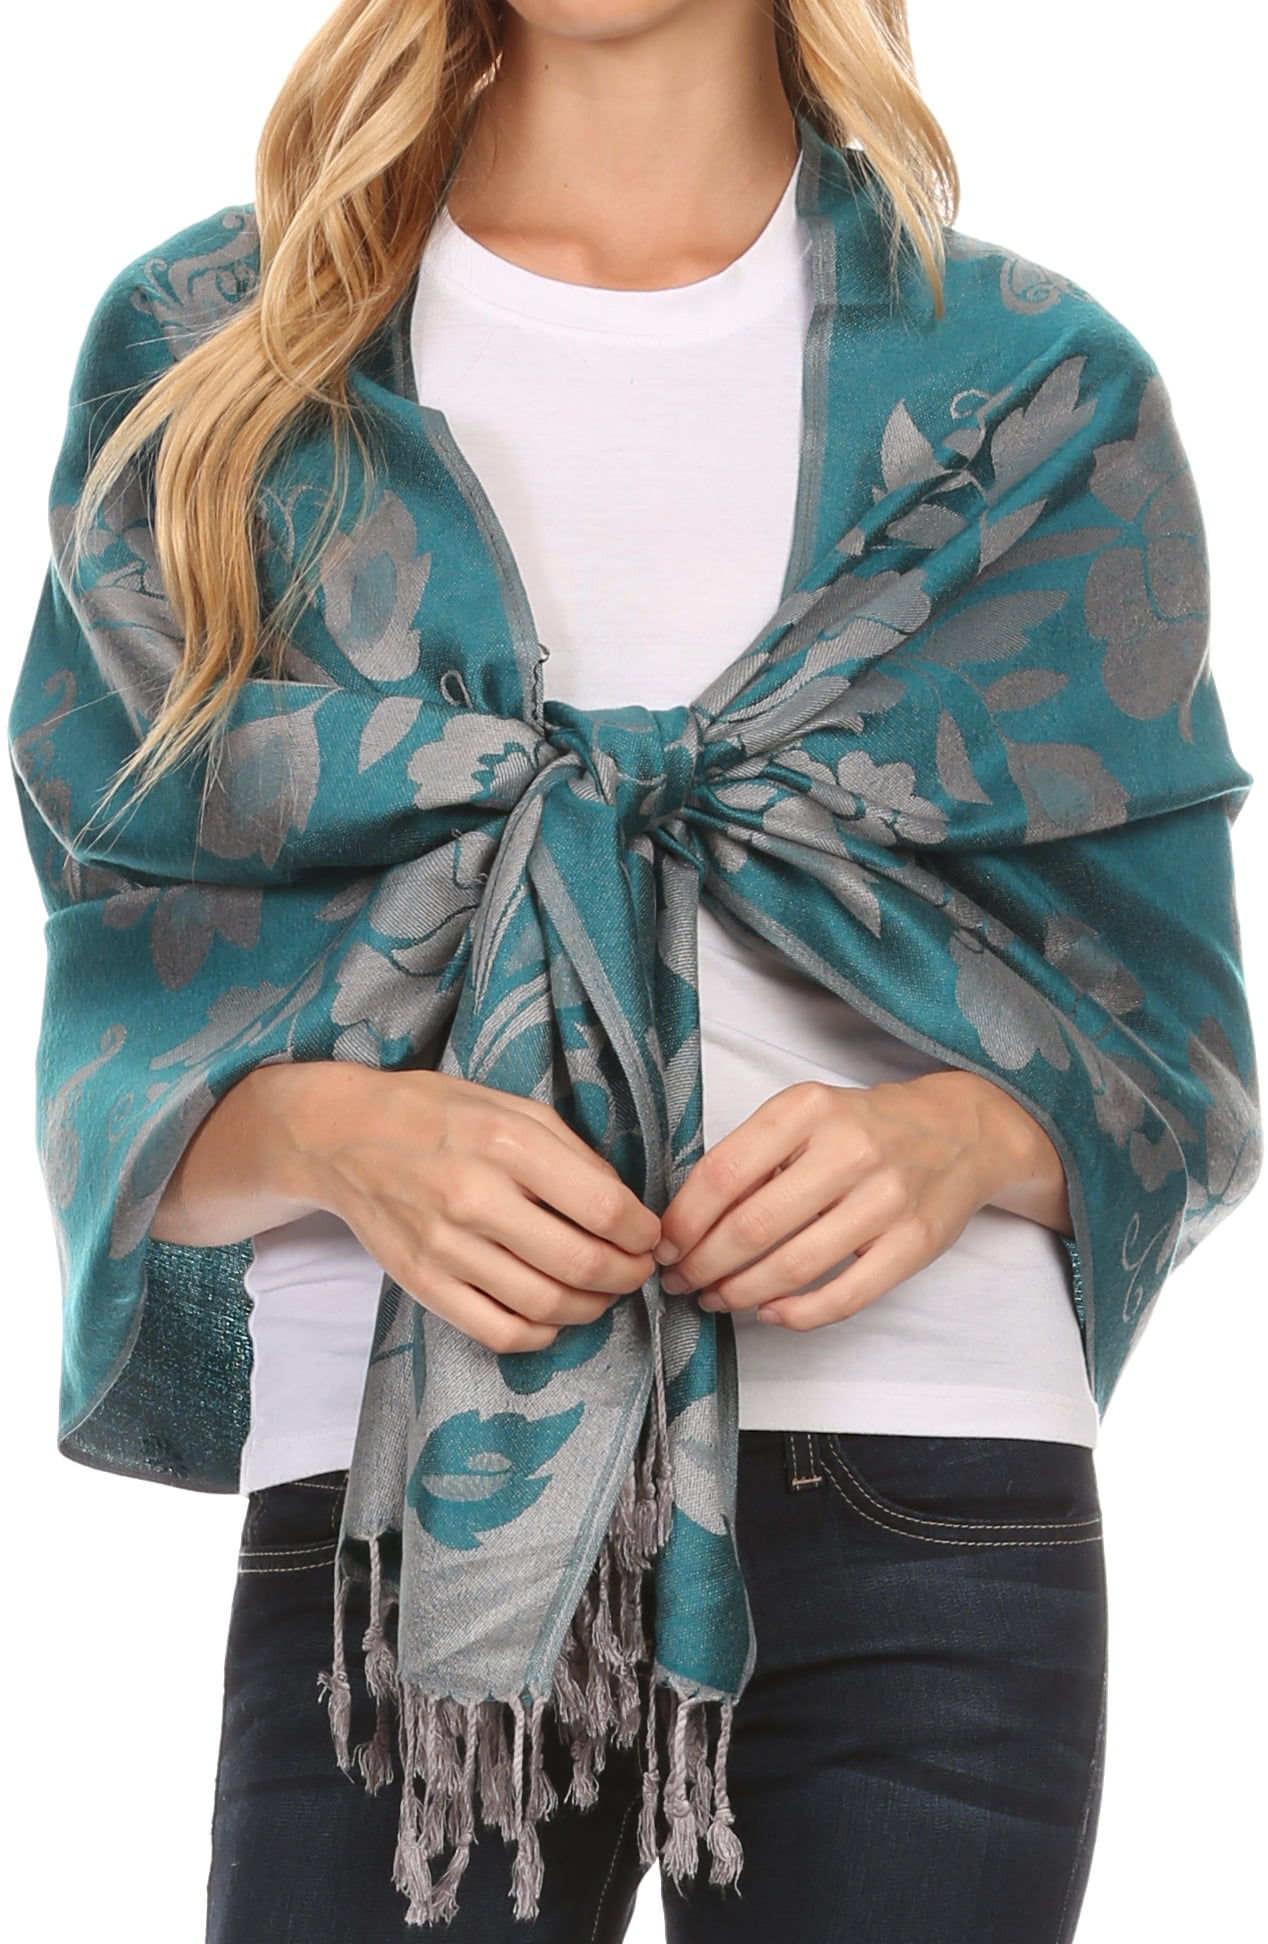 BUTTERFLY SCARF BUTTERFLIES REVERSIBLE PASHMINA SHAWL WRAP SUPERB SOFT QUALITY 